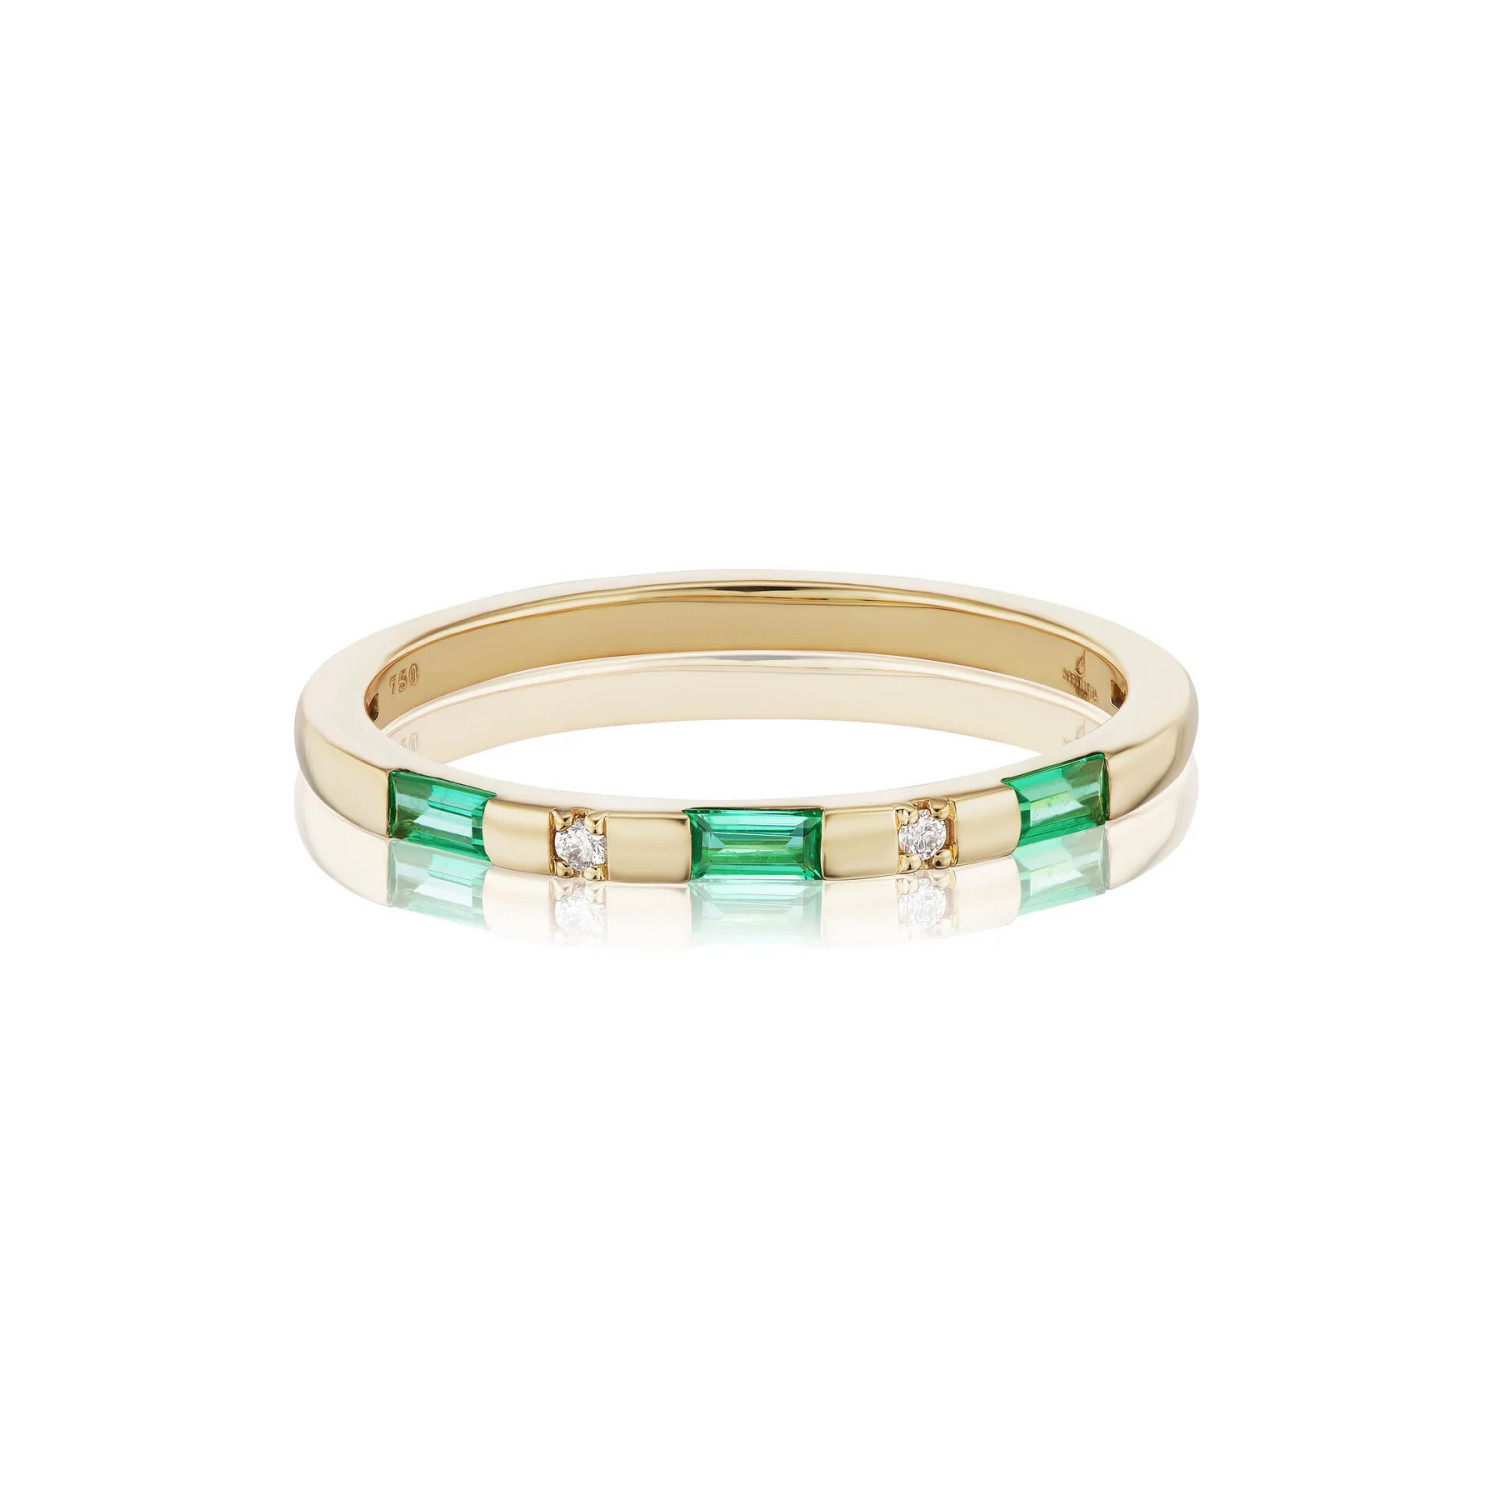 Emerald and Diamond Singe Row Tarot Baguette Band in 18K Yellow Gold